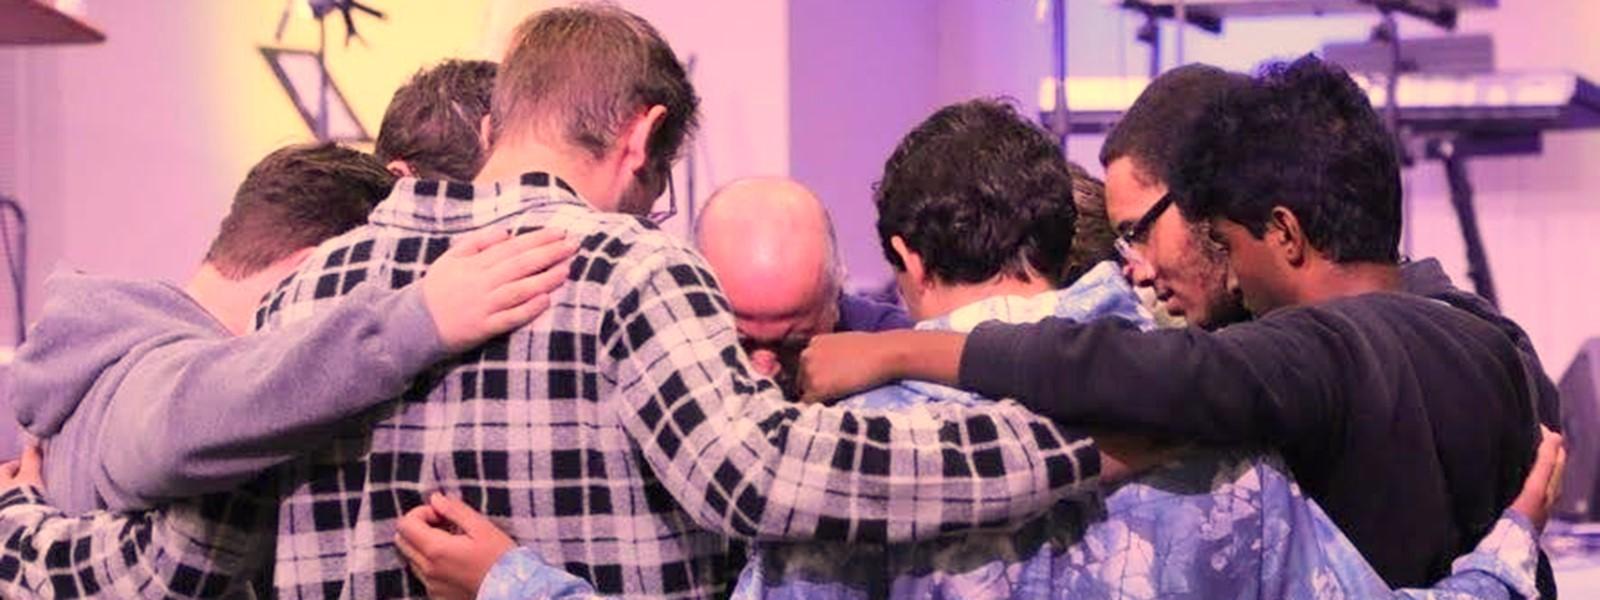 A group of CIU men pray for world evangelization. (Photo by Chariti Mealing, CIU student photographer)